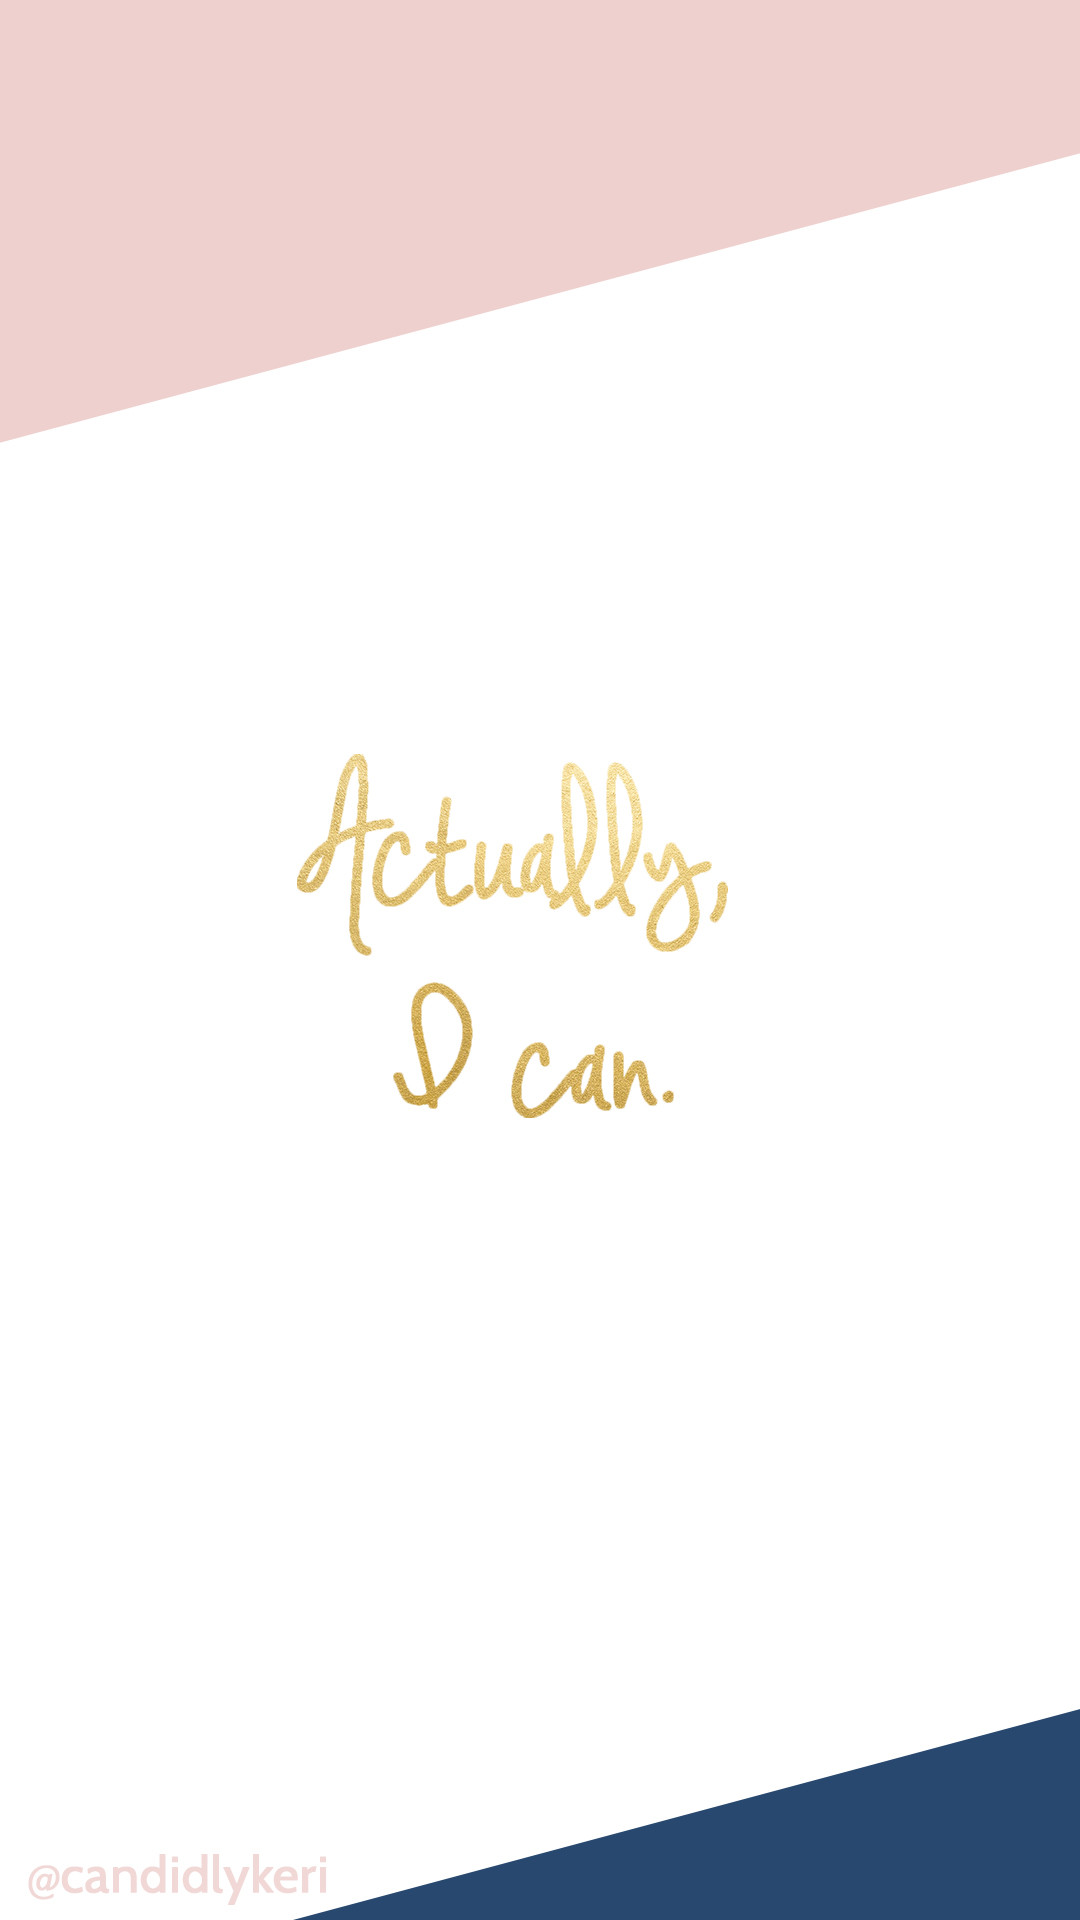 1080x1920 Actually I can, blush pink navy gold foil background wallpaper you can  download for free